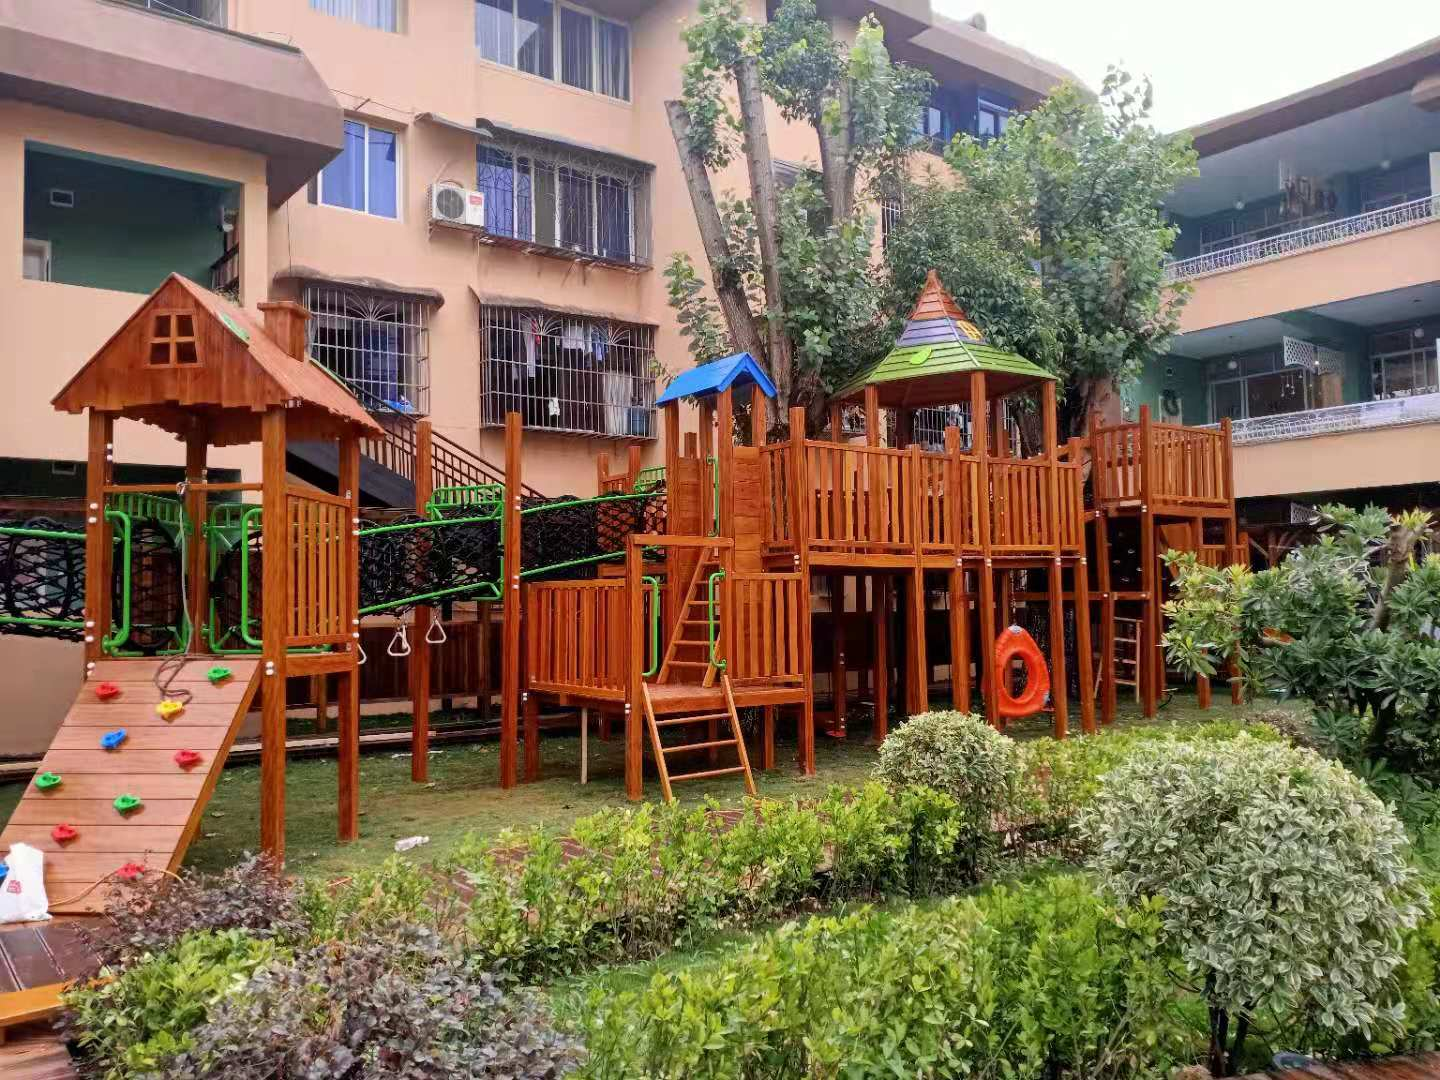 ChowChow outdoor wooden playground for community